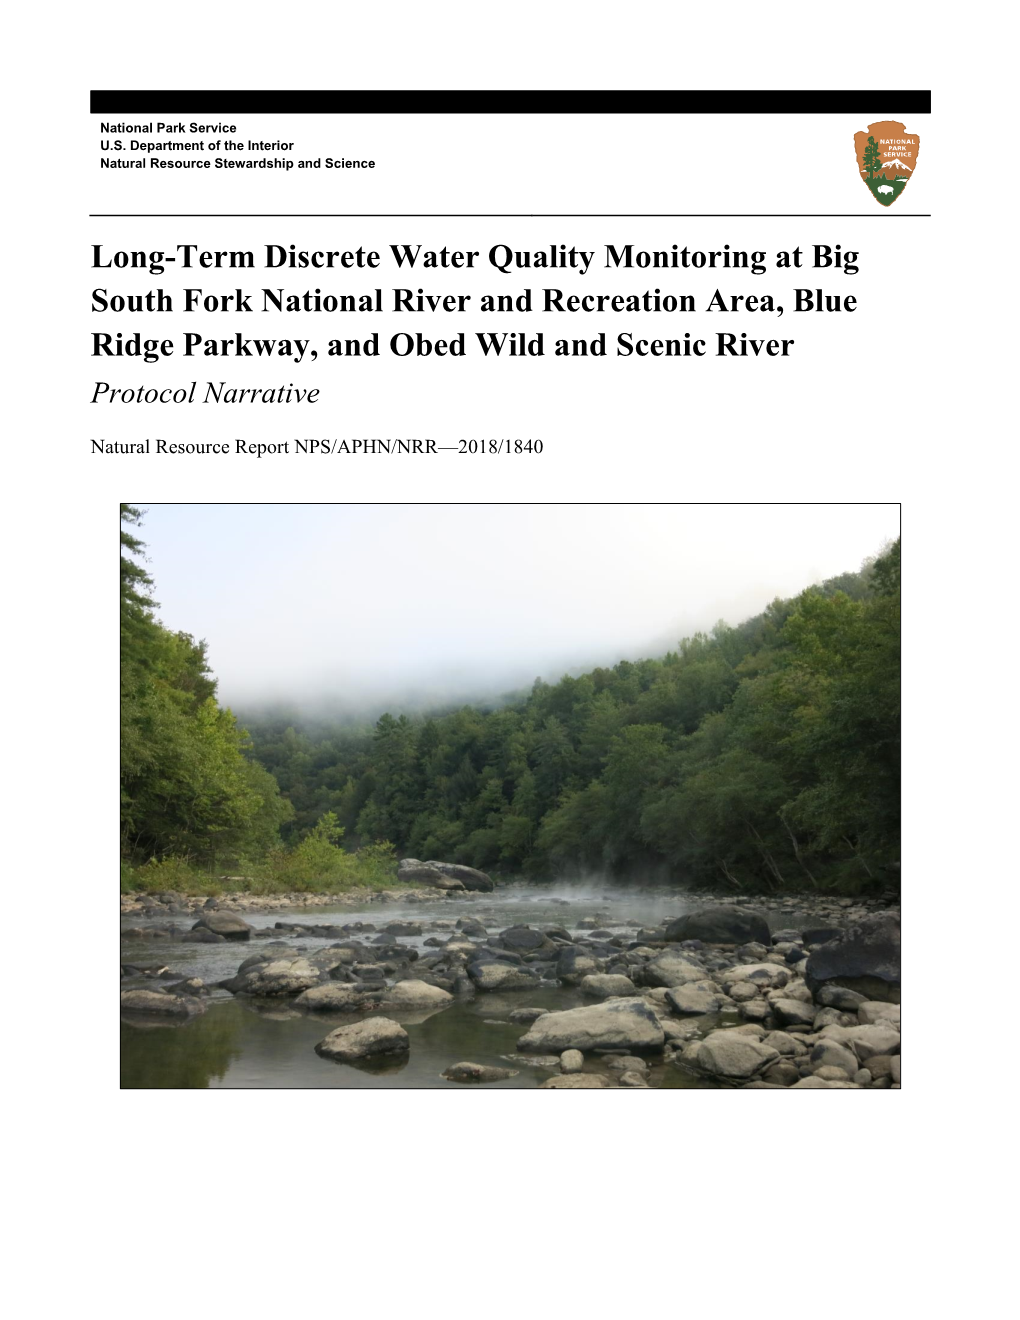 Long-Term Discrete Water Quality Monitoring at Big South Fork